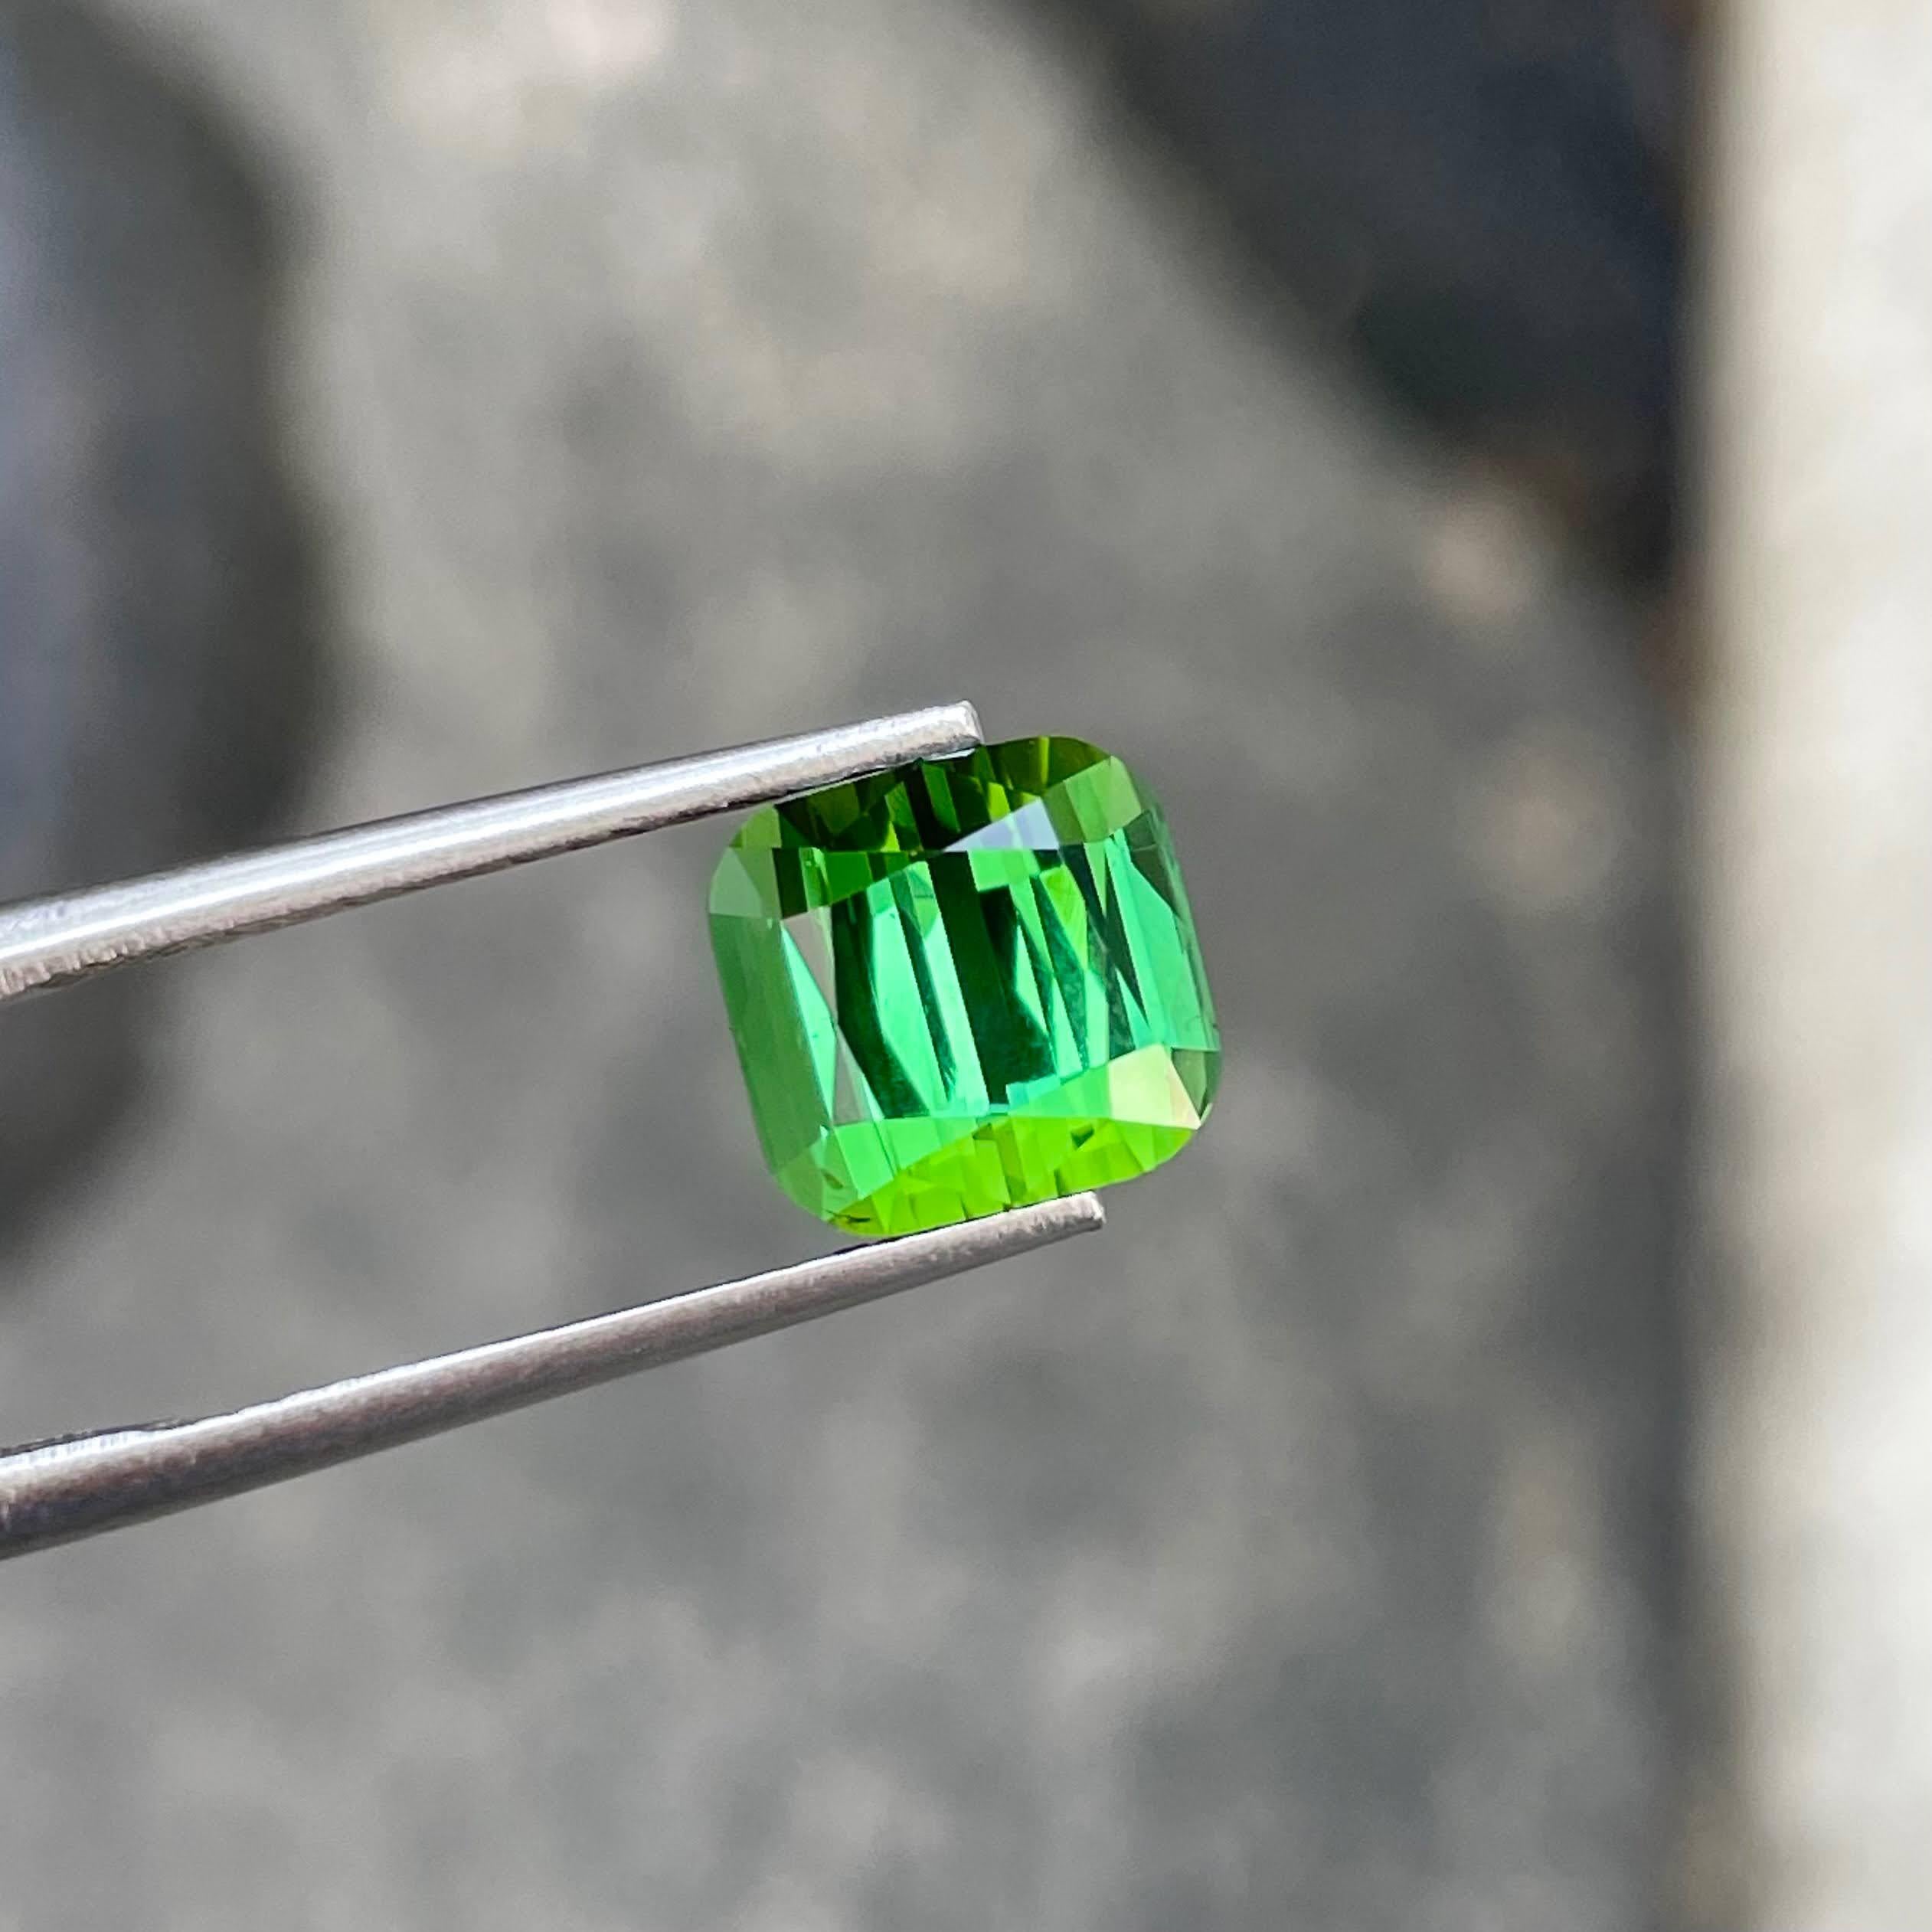 Weight 4.26 carats
Dimensions 8.2x8.5x7.8 mm
Treatment none 
Origin Afghanistan 
Clarity VVS
Shape cushion 
Cut fancy cushion 





The 4.26-carat Lustrous Bluish Green Tourmaline is an exquisite gemstone originating from Afghanistan, renowned for